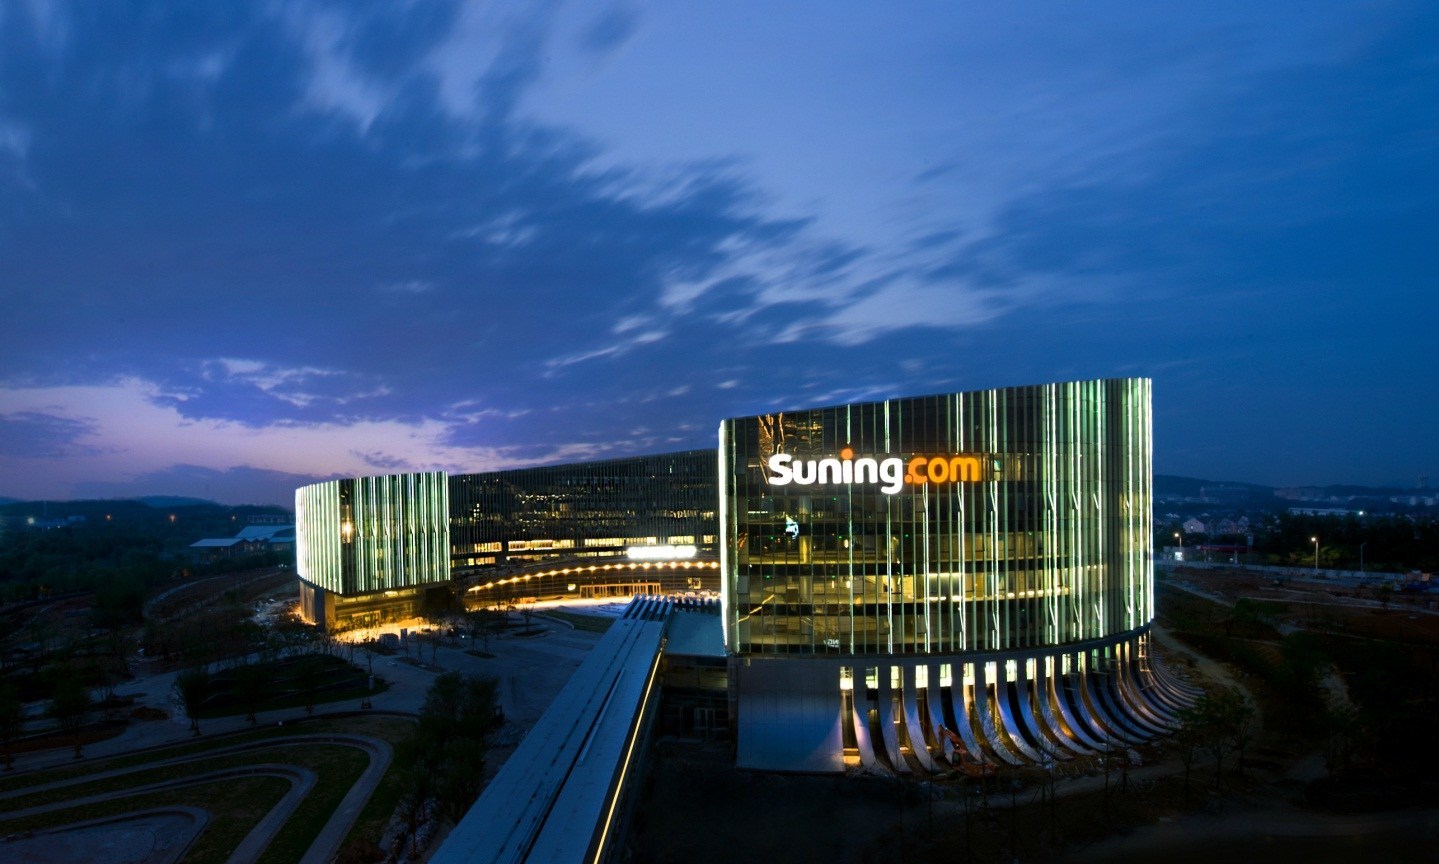 Suning.com announces the acquisition of Carrefour China to achieve leaping development of FMCG retailing operations